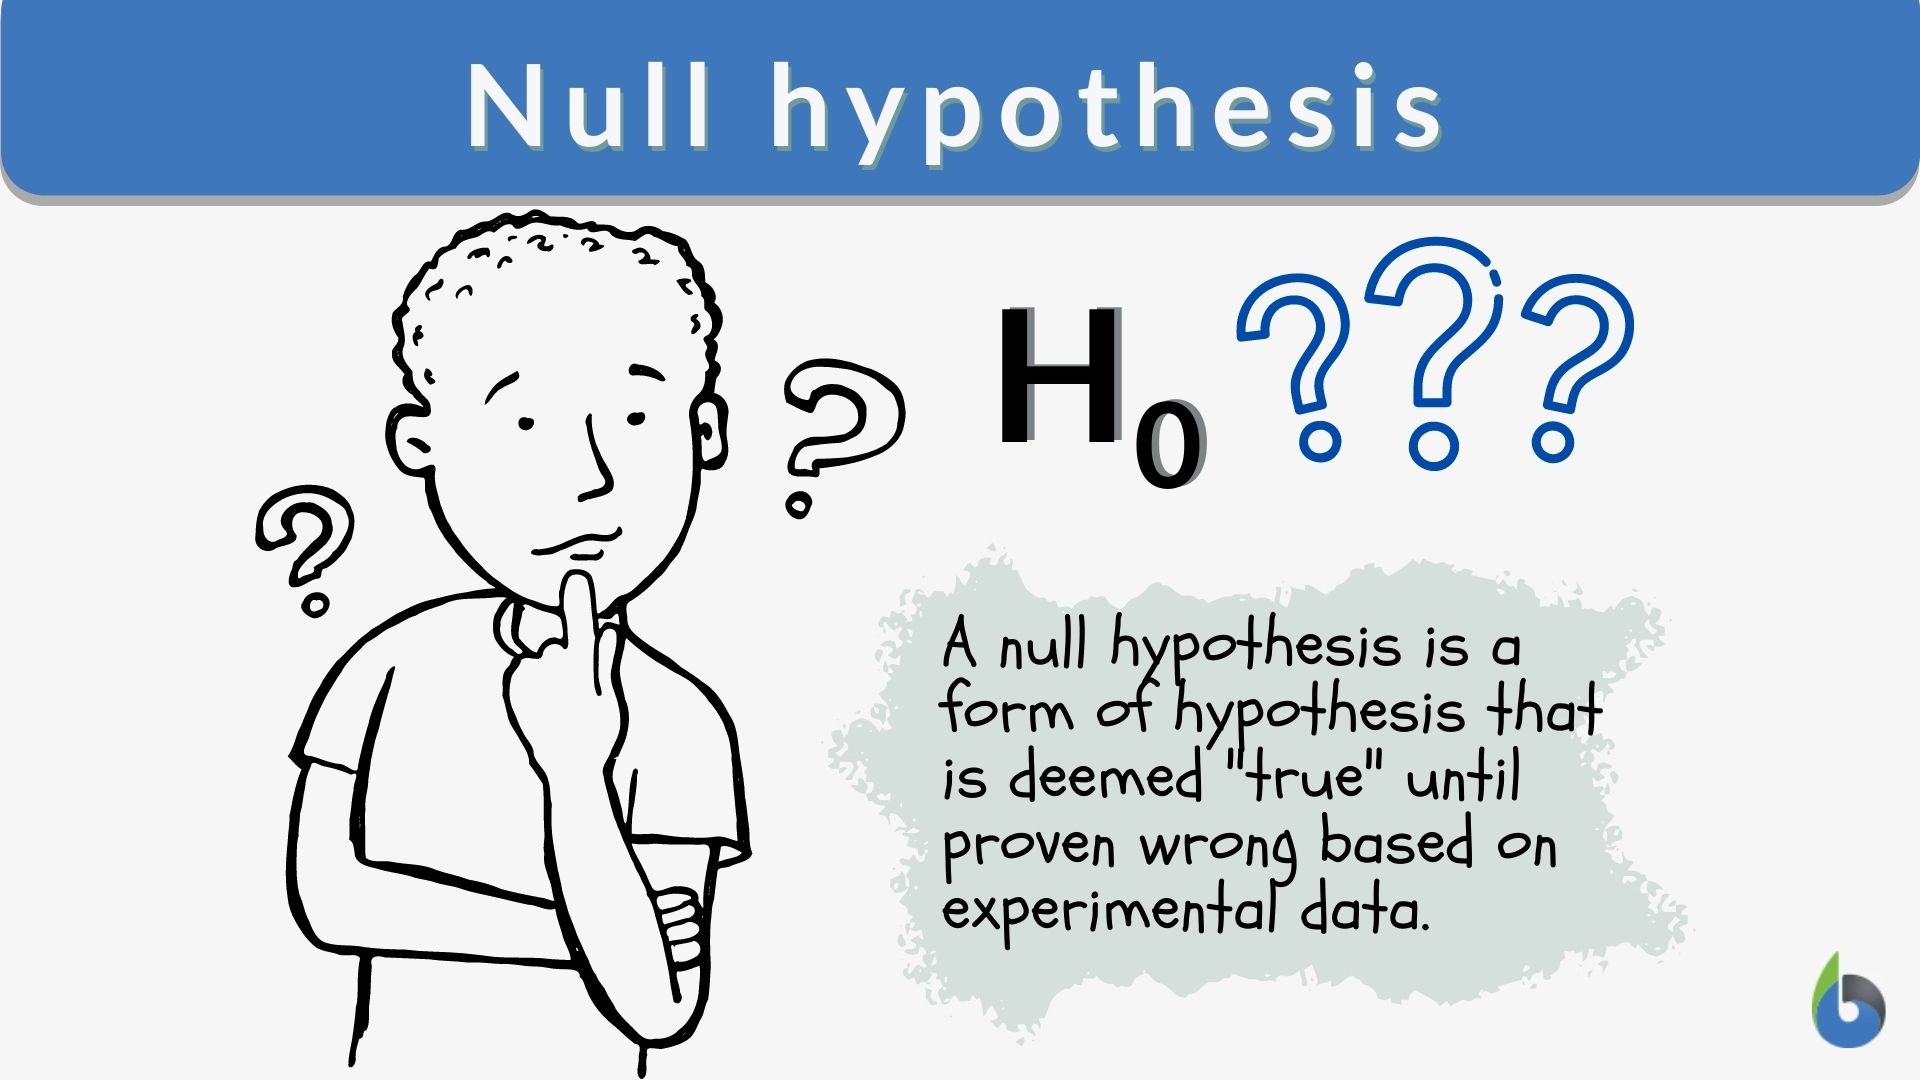 results support the null hypothesis